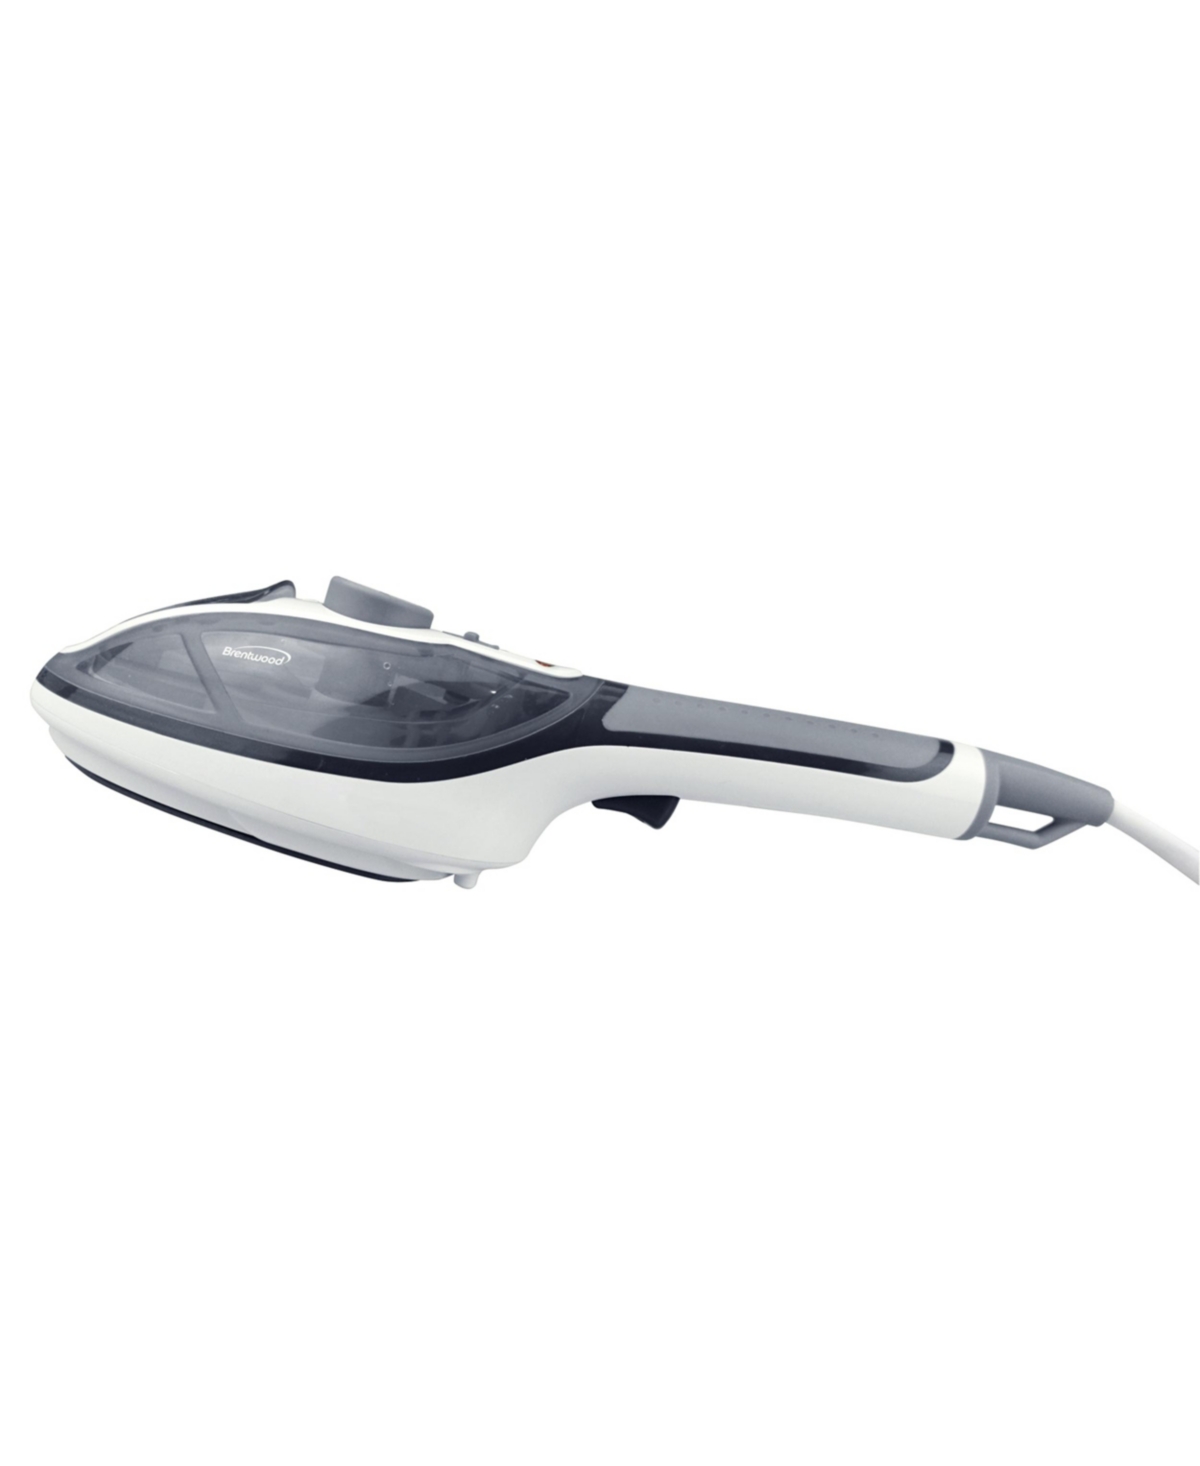 Brentwood Nonstick Handheld Clothes Steamer and Iron - Grey